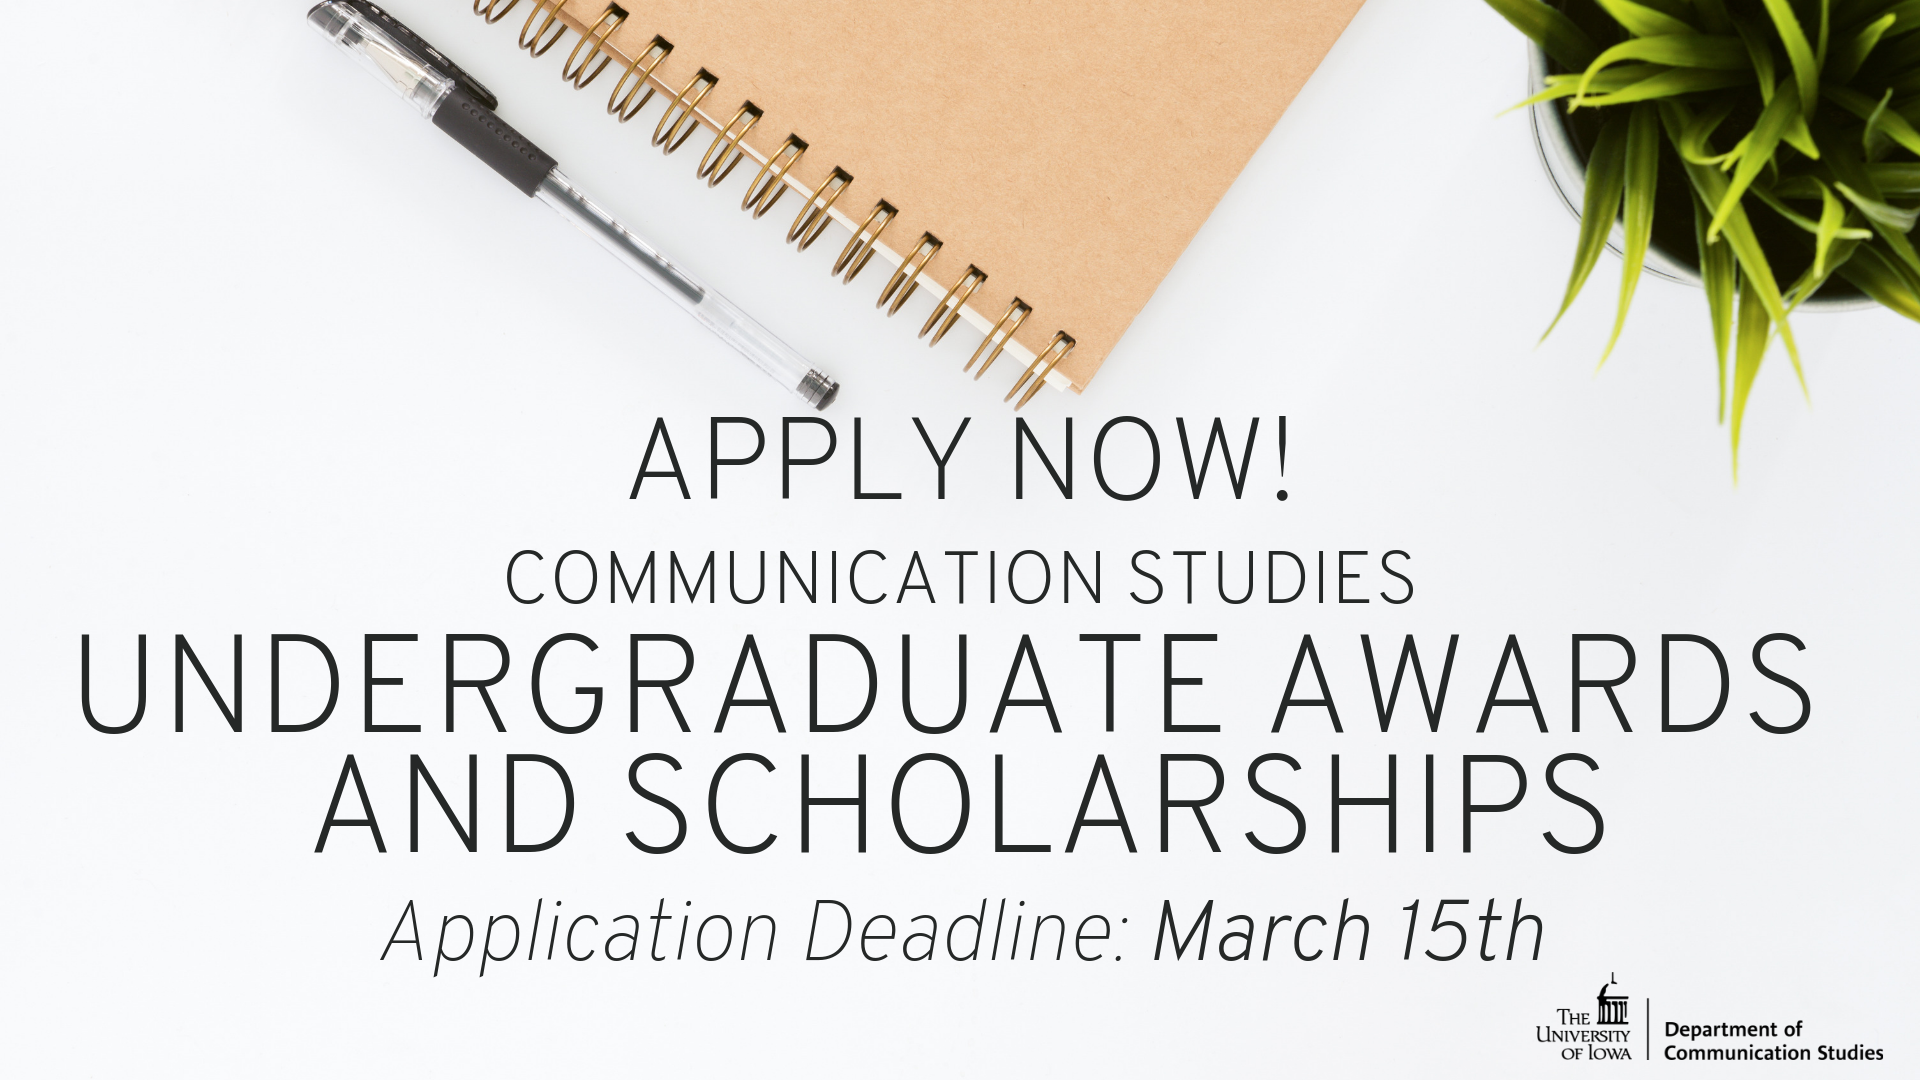 Apply Now! Communication Studies Undergraduate Awards and Scholarships. Application Deadline: March 15th